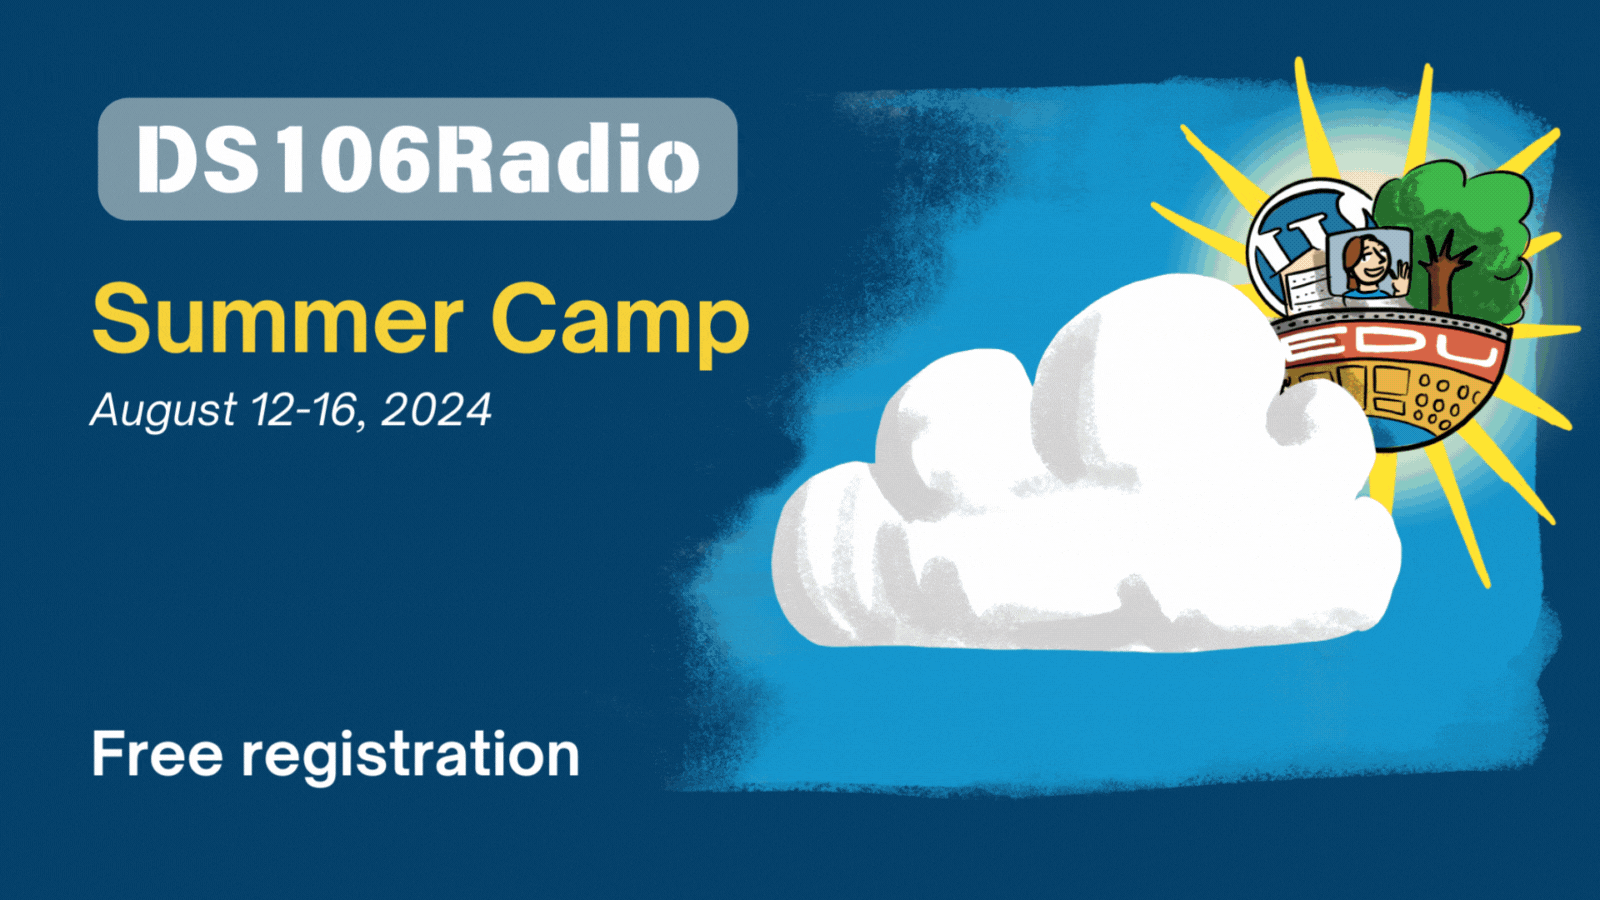 GIF inviting people to DS106 Radio Summer Camp, August 12-16, 2024, with session ideas & registration info.